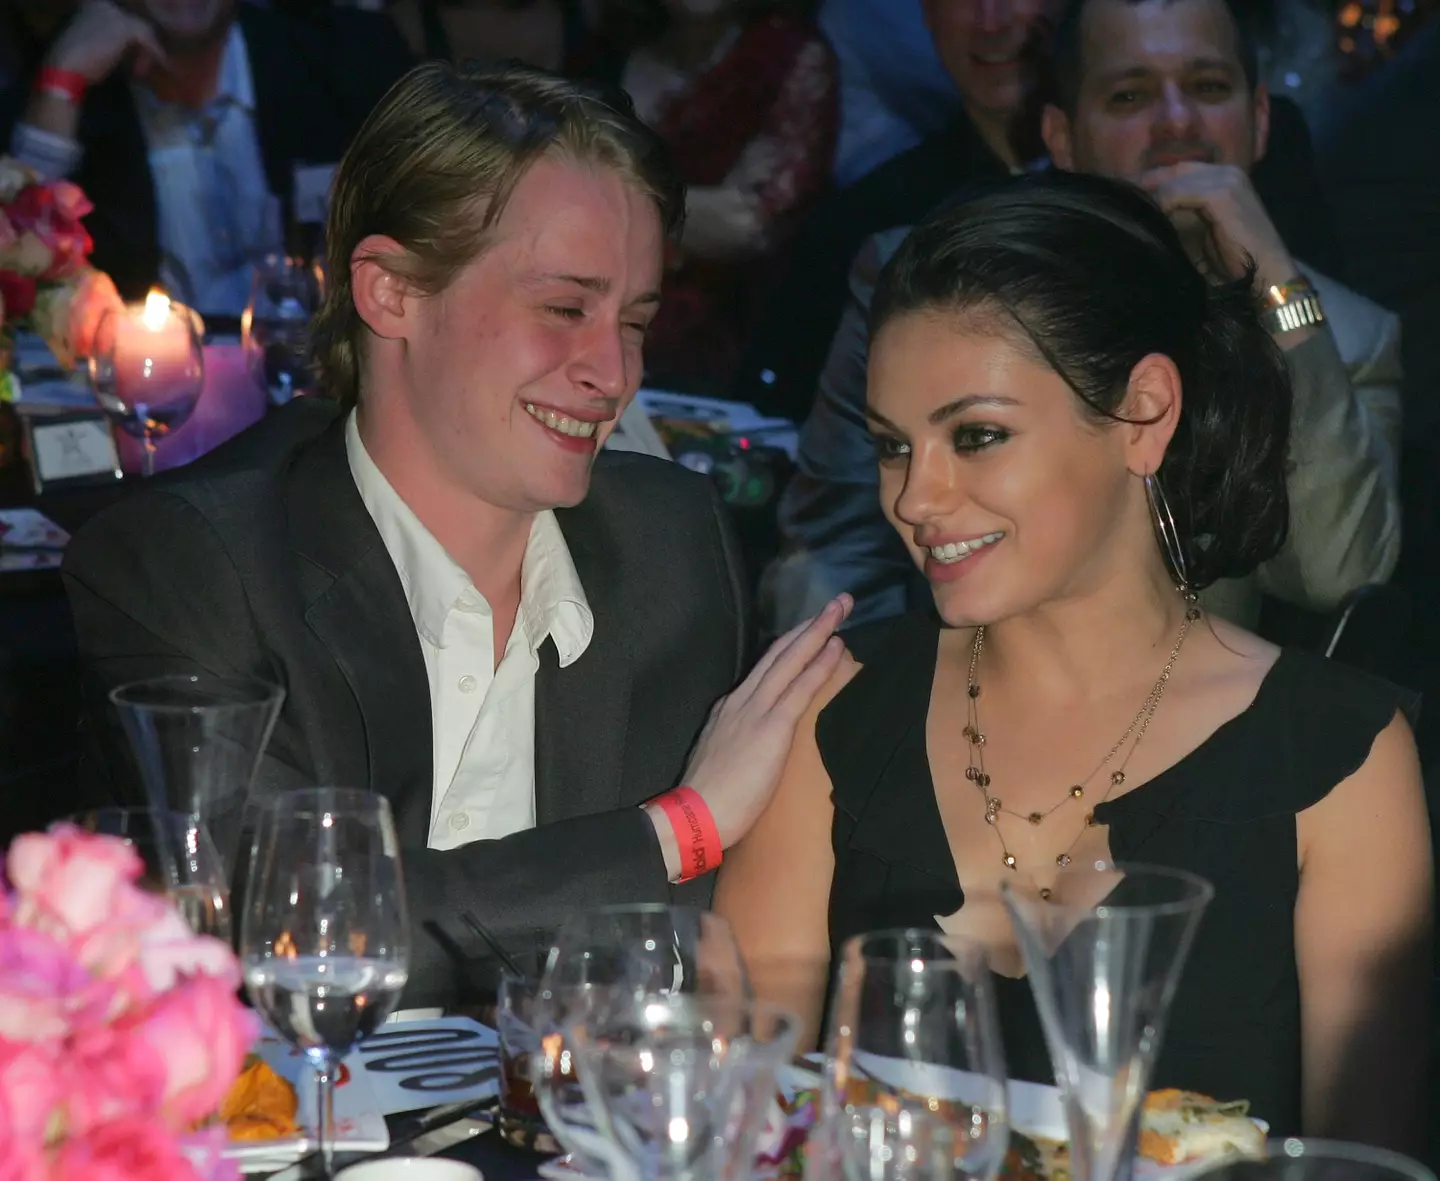 Culkin and Kunis kept their eight-year relationship under wraps.